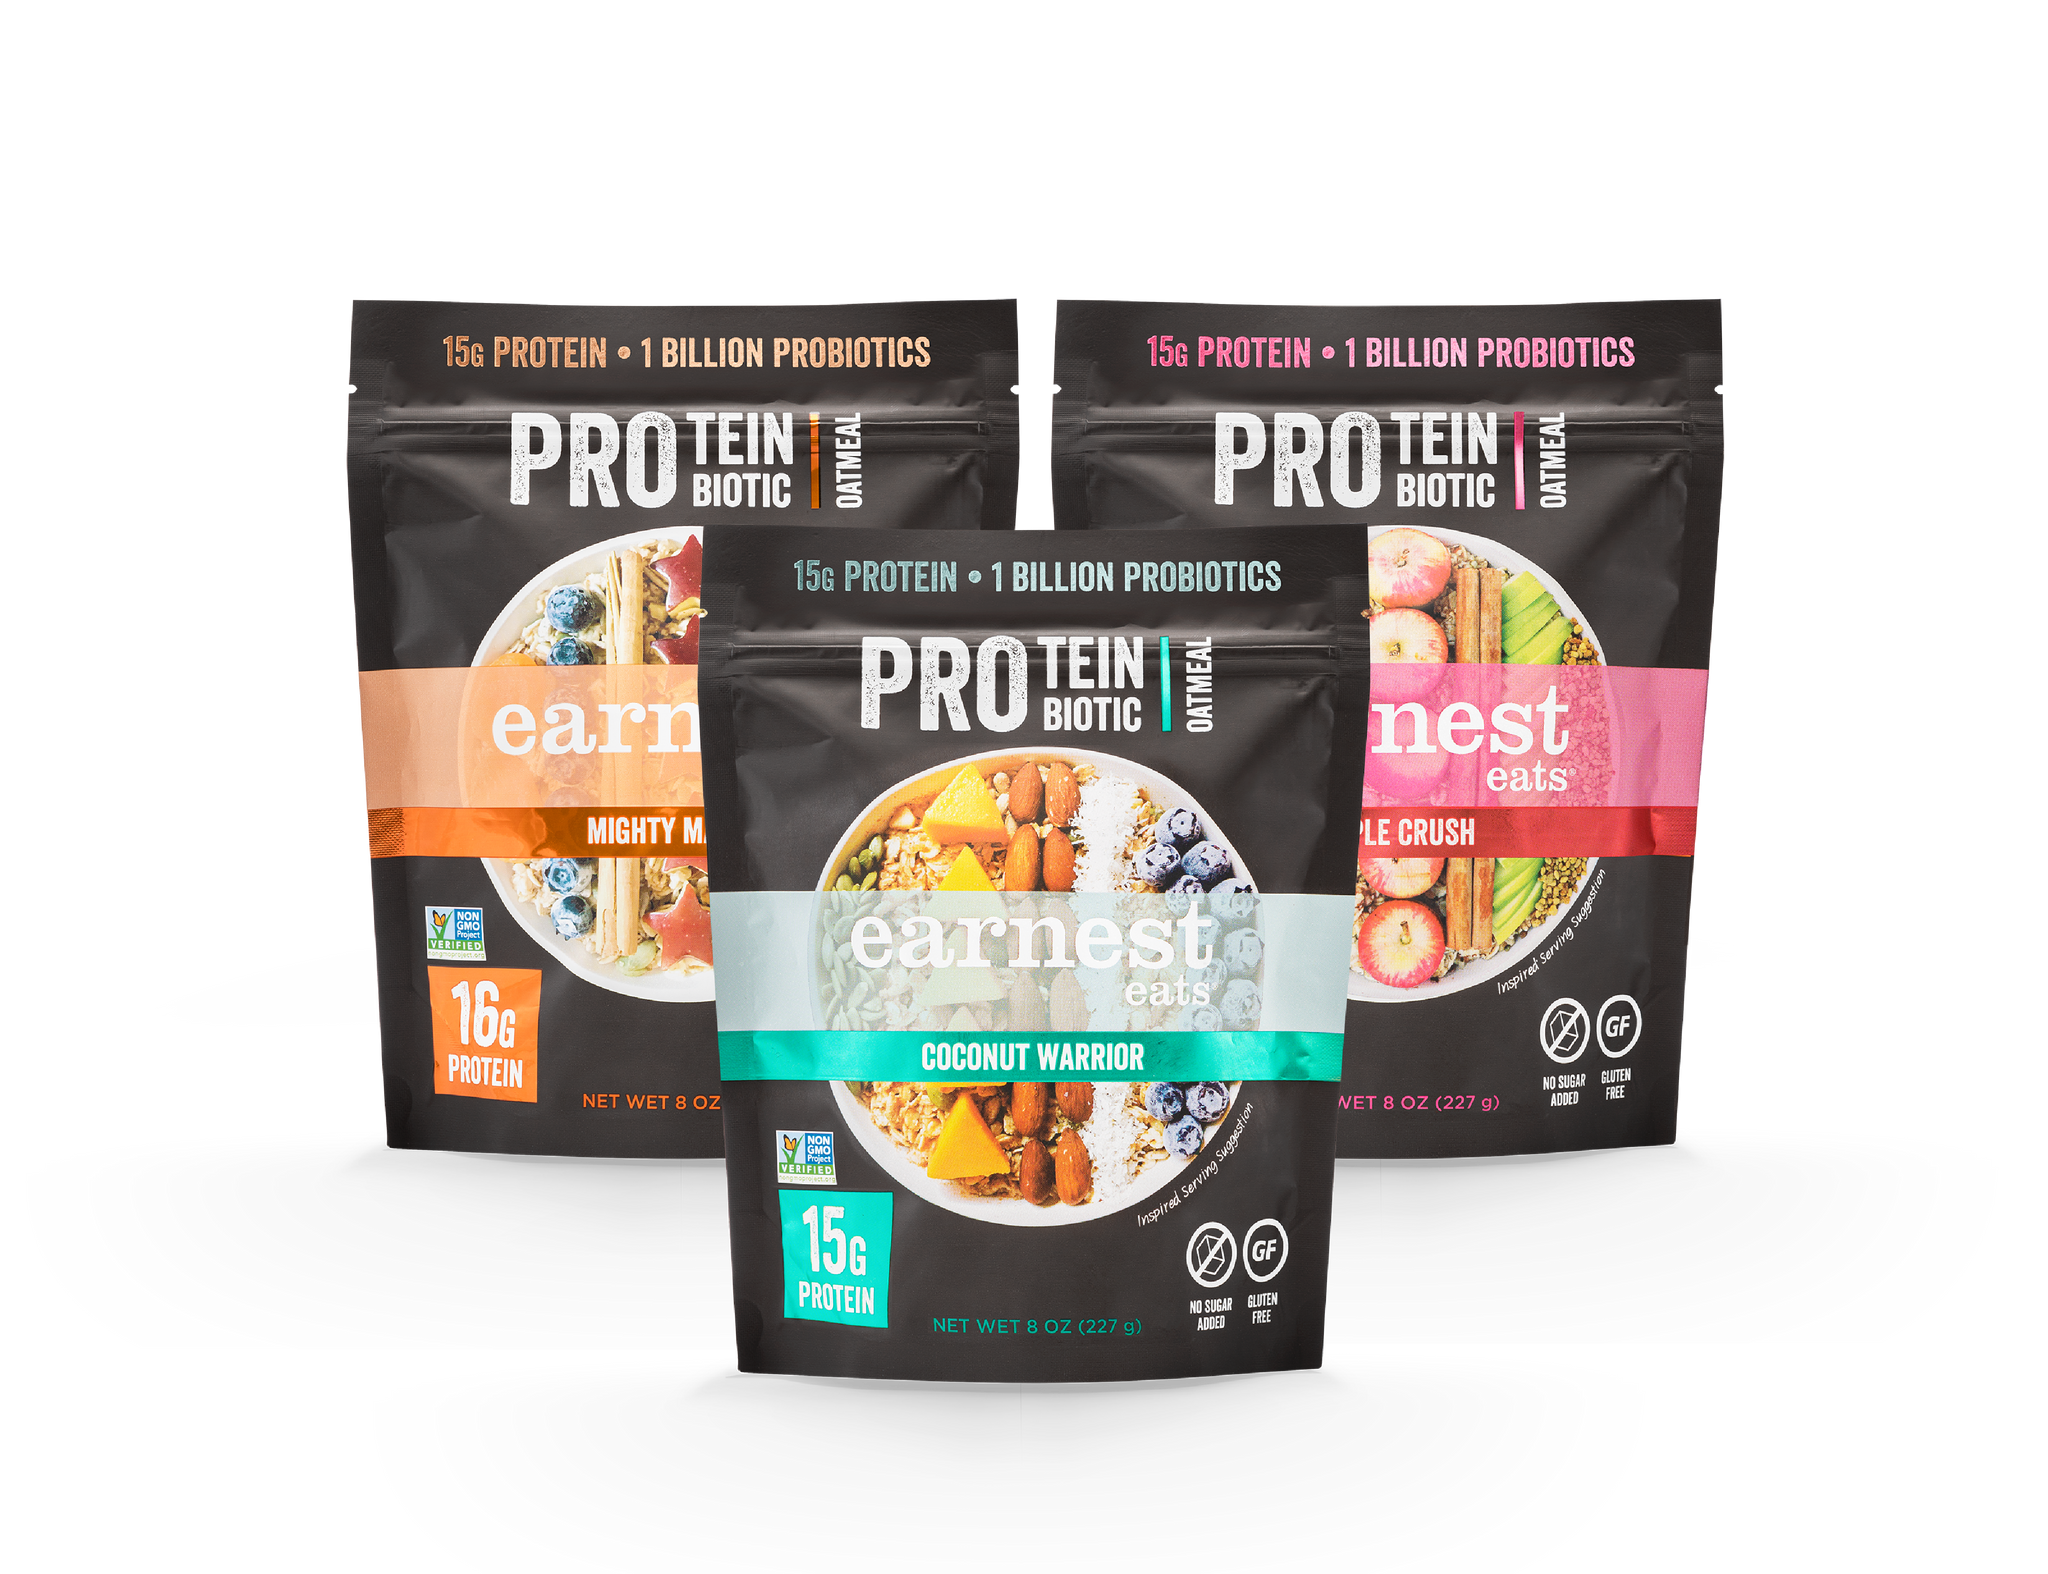 Protein & Probiotic Oatmeal Bags